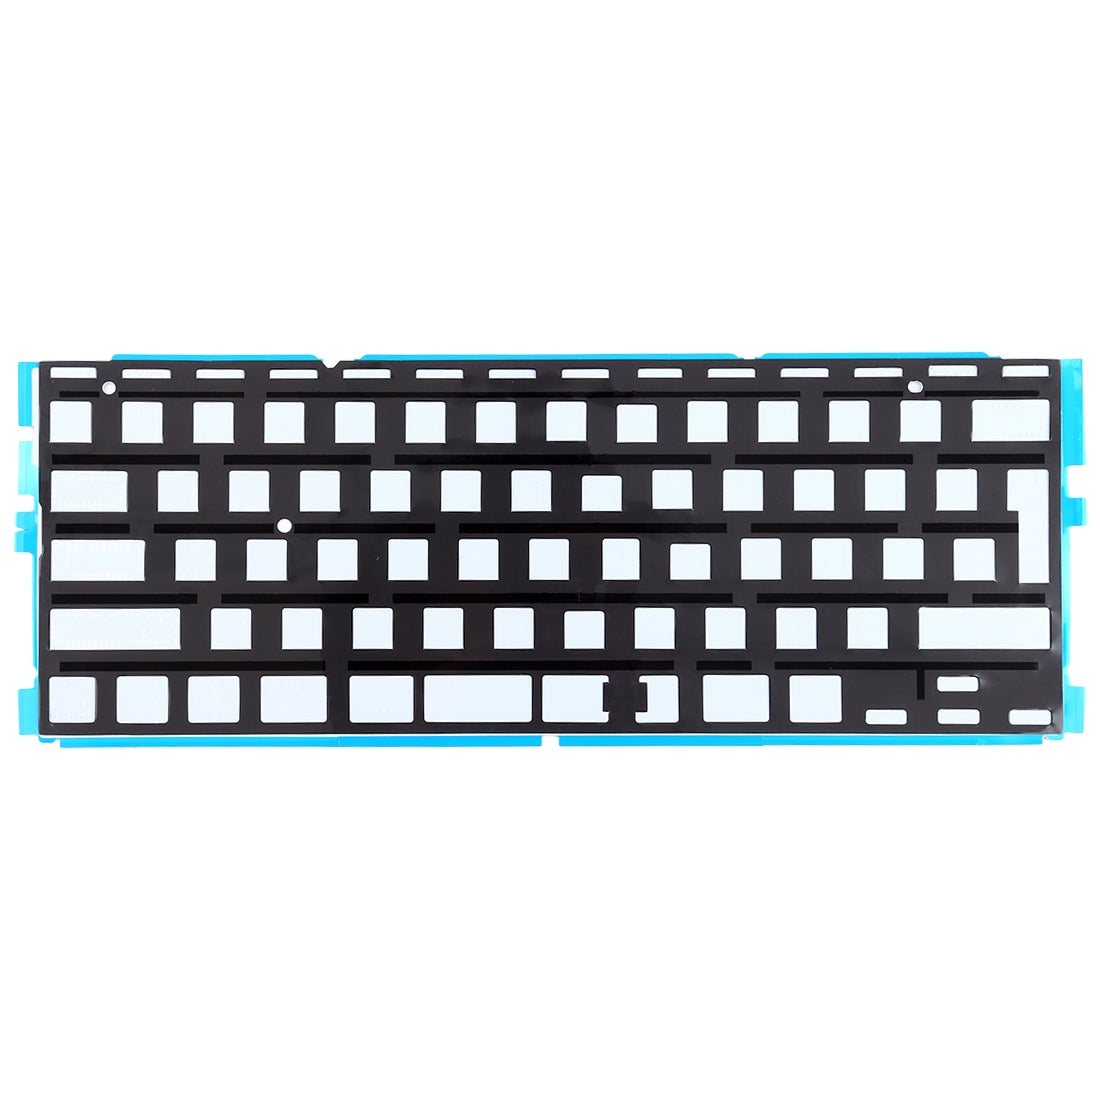 Backlight Keyboard UK Version without ñ MacBook Air 11.6 A1370 A1465